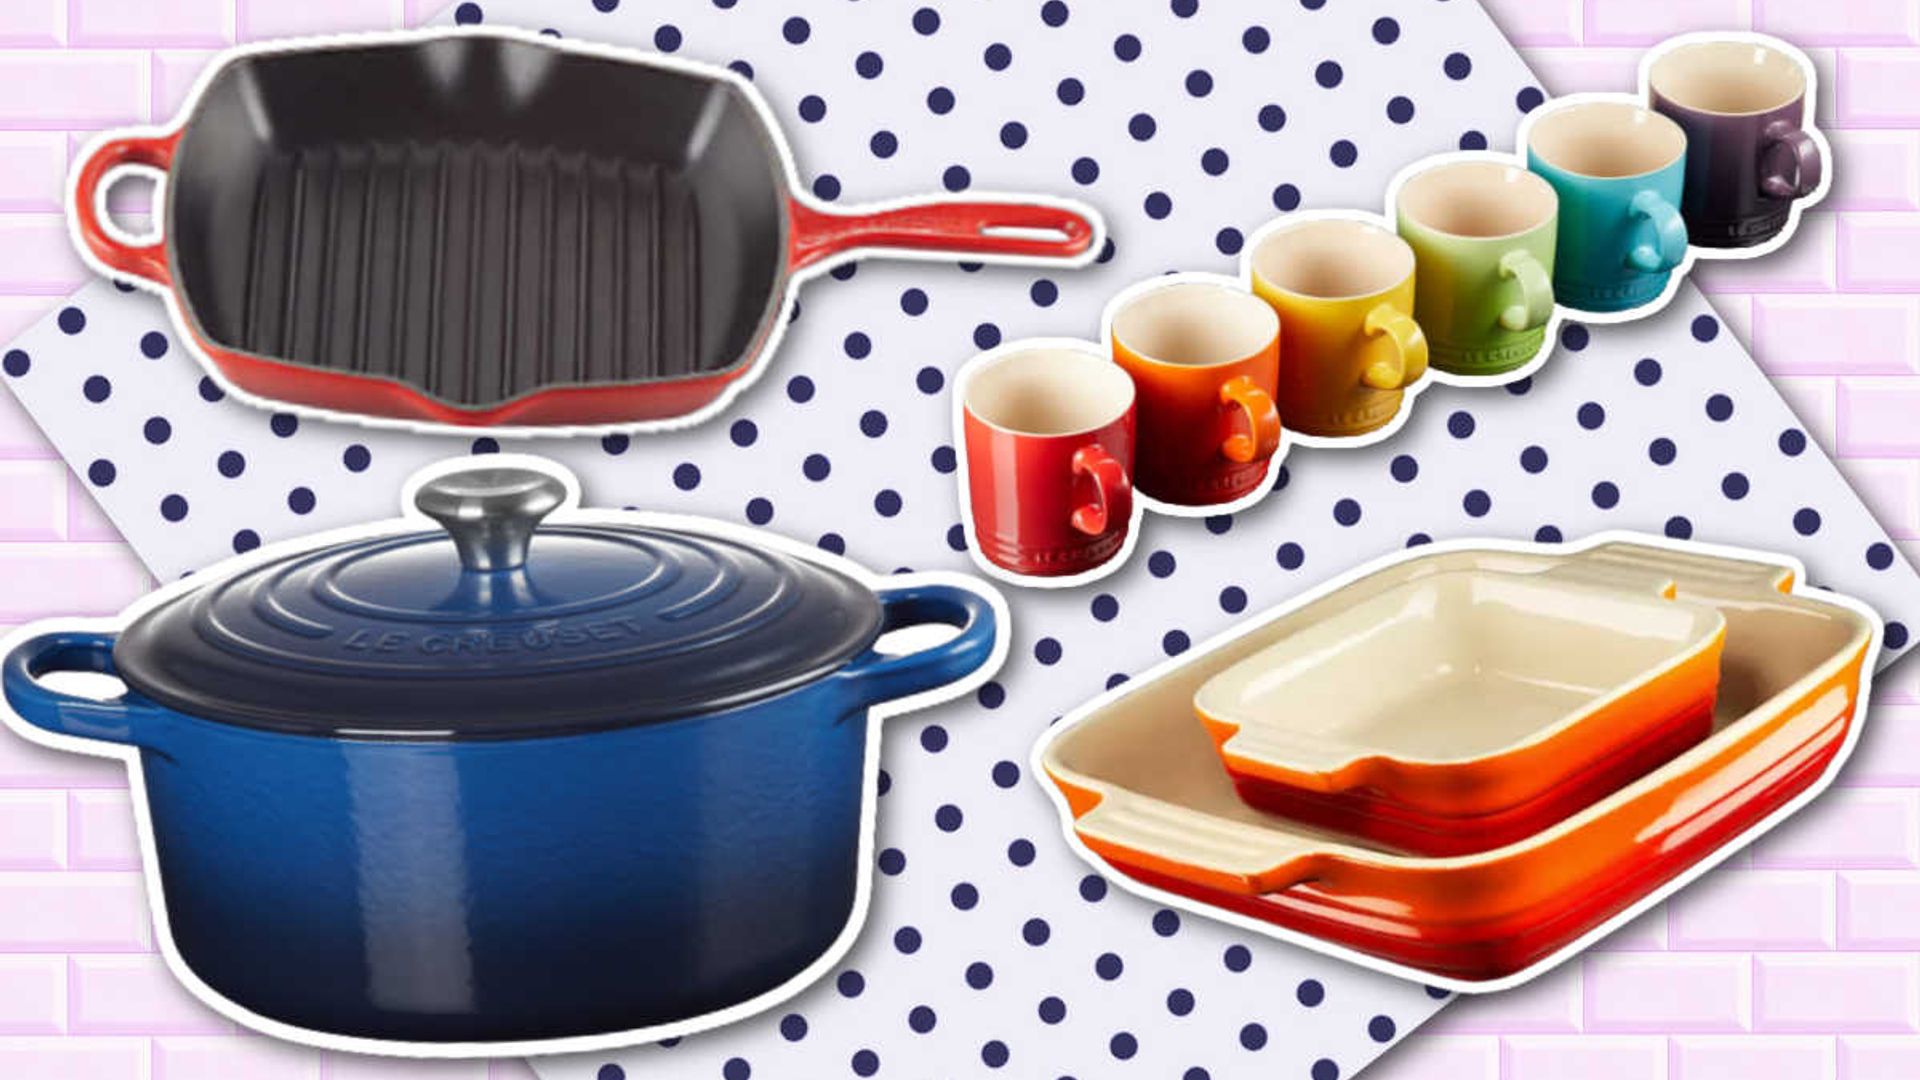 How to save money on Le Creuset cookware - The Nourishing Gourmet